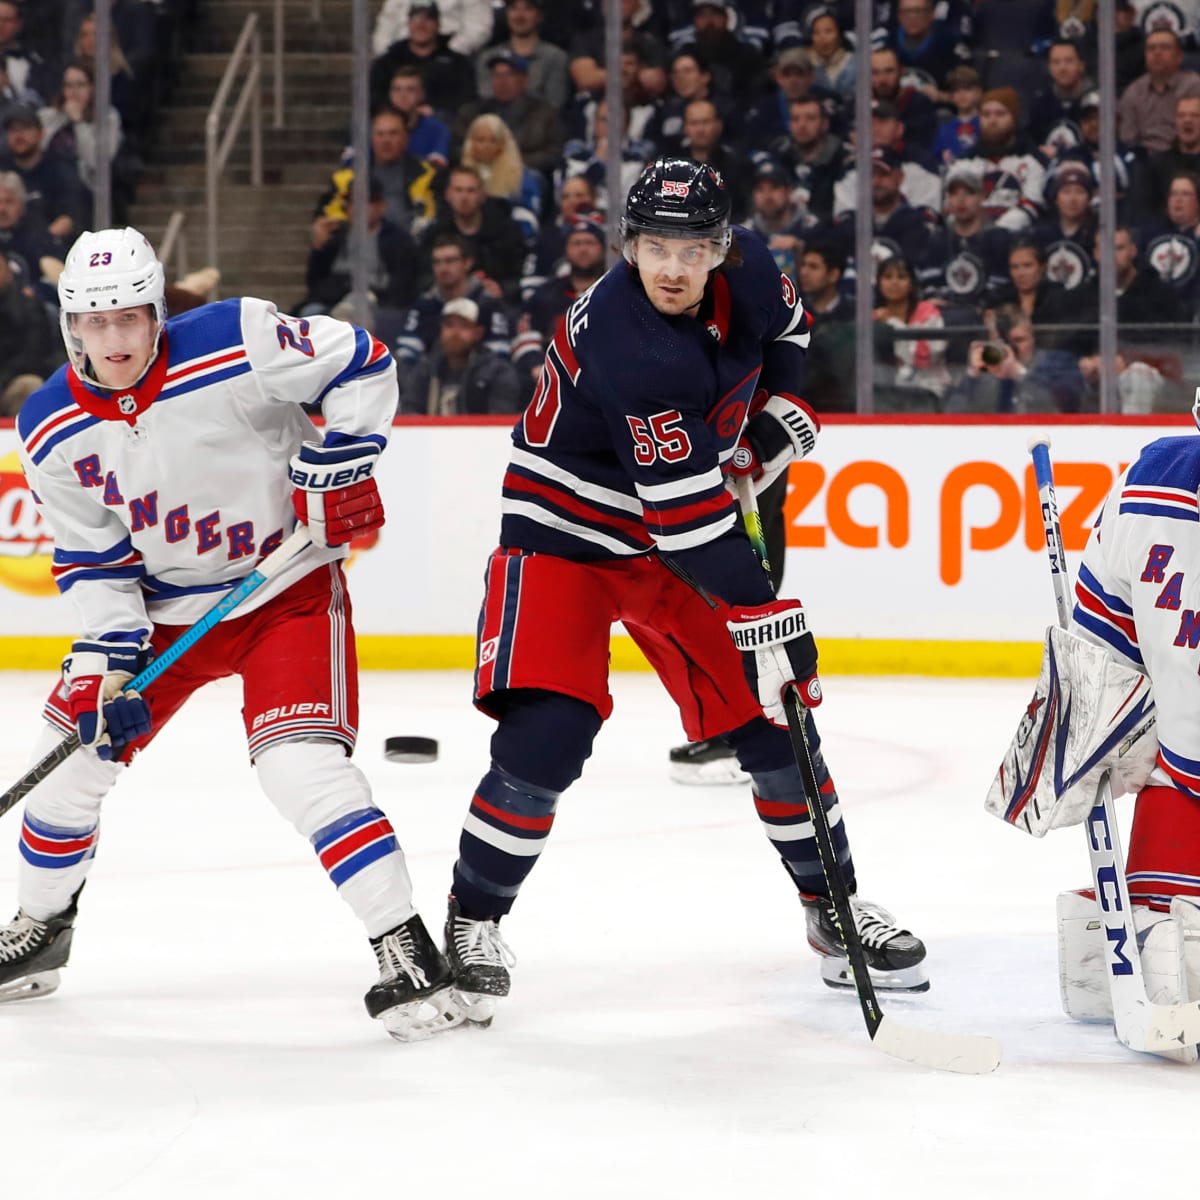 Tensions flare in New York Rangers' 4-0 dominance over New Jersey